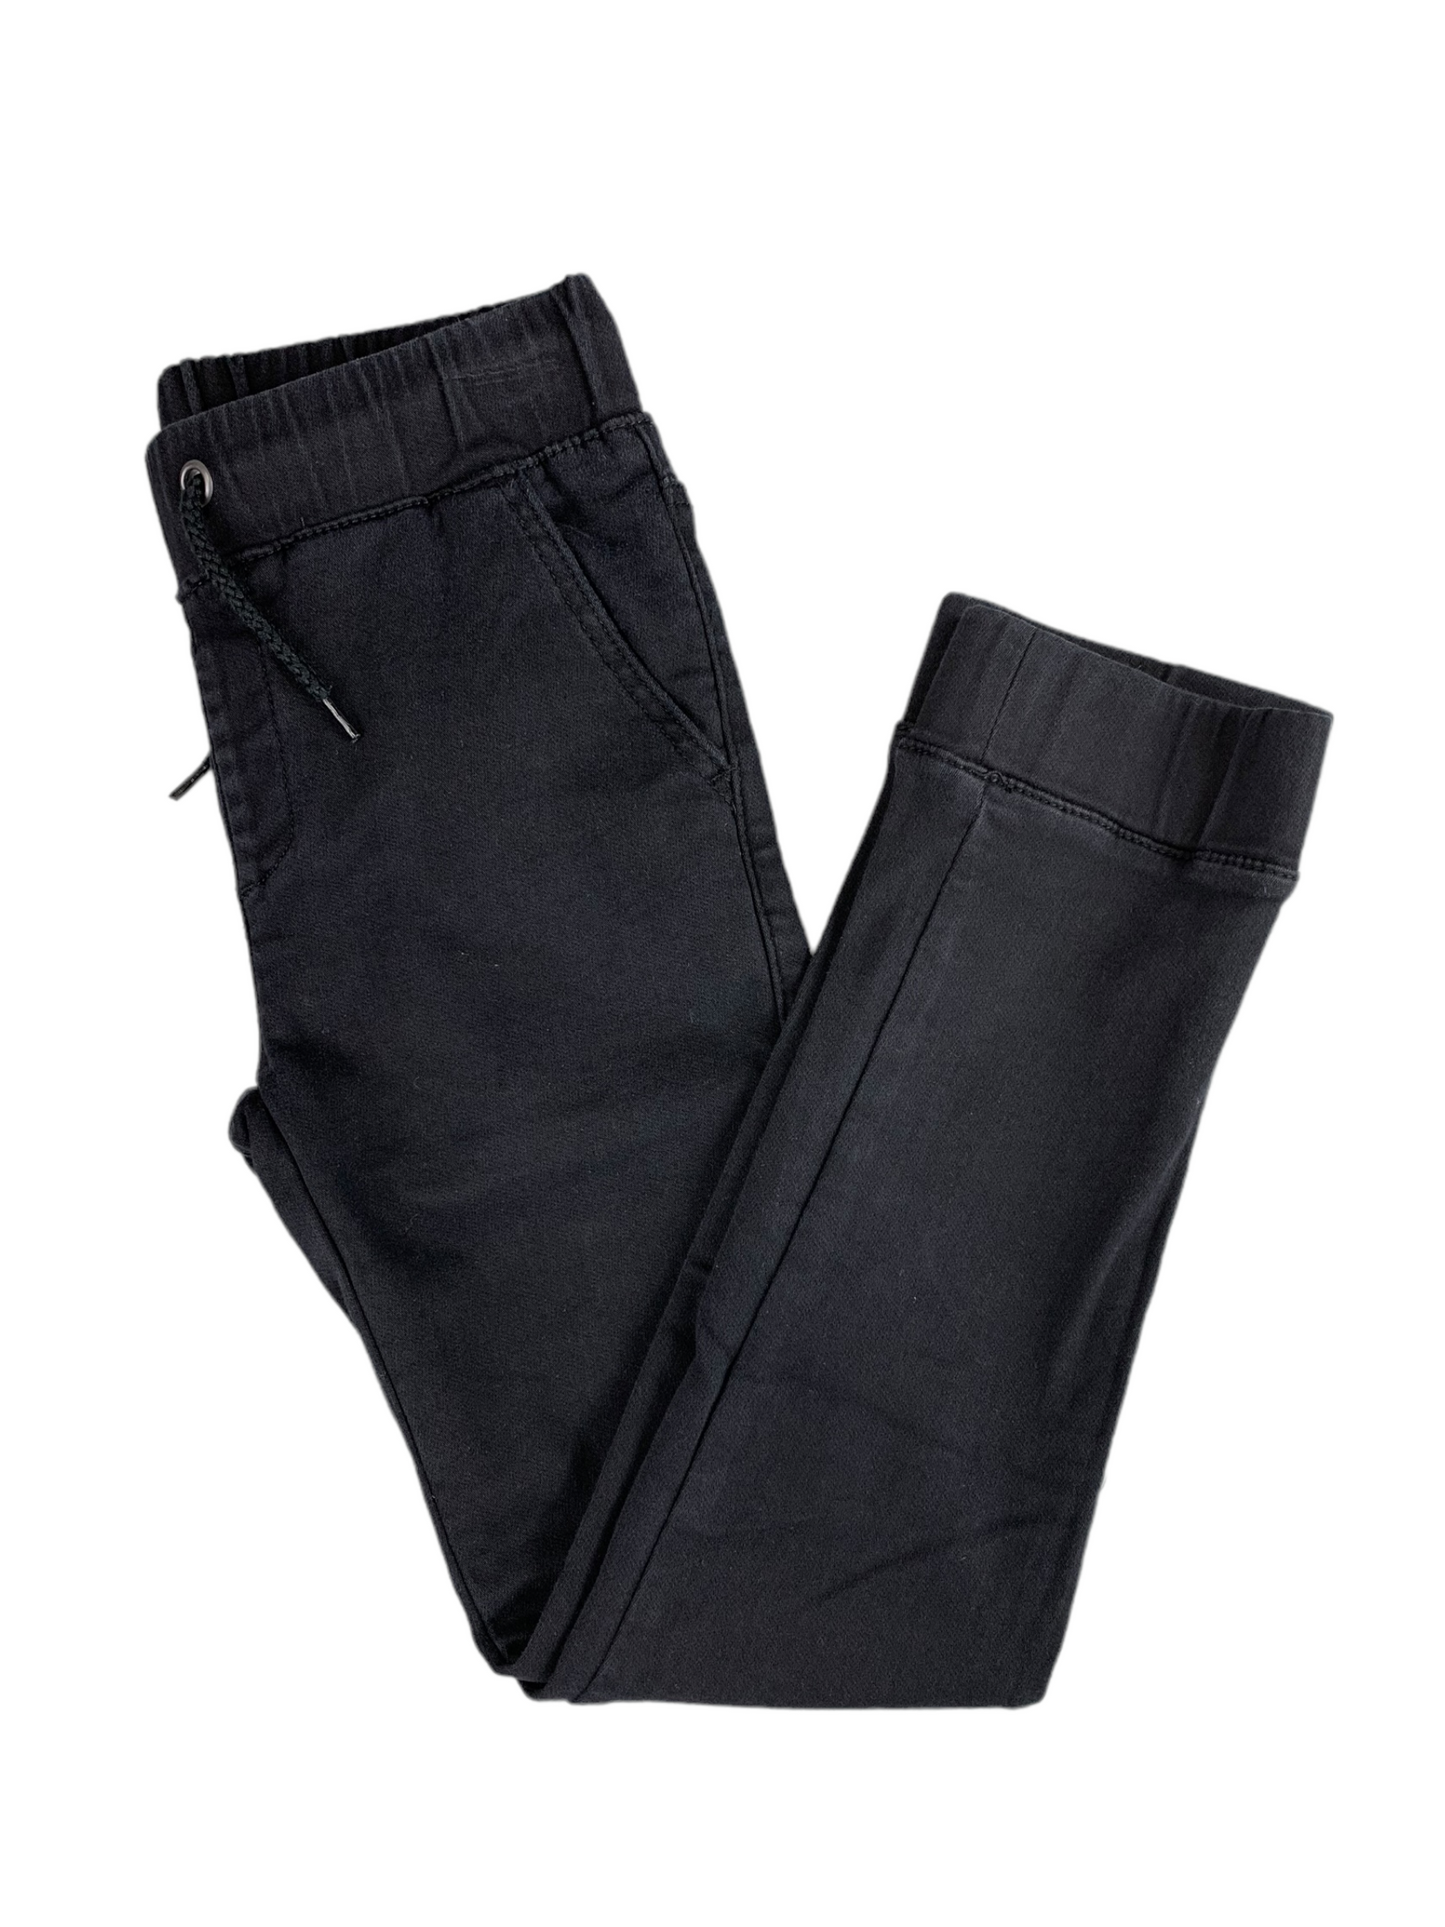 Black jogger for boys 8 to 16 years